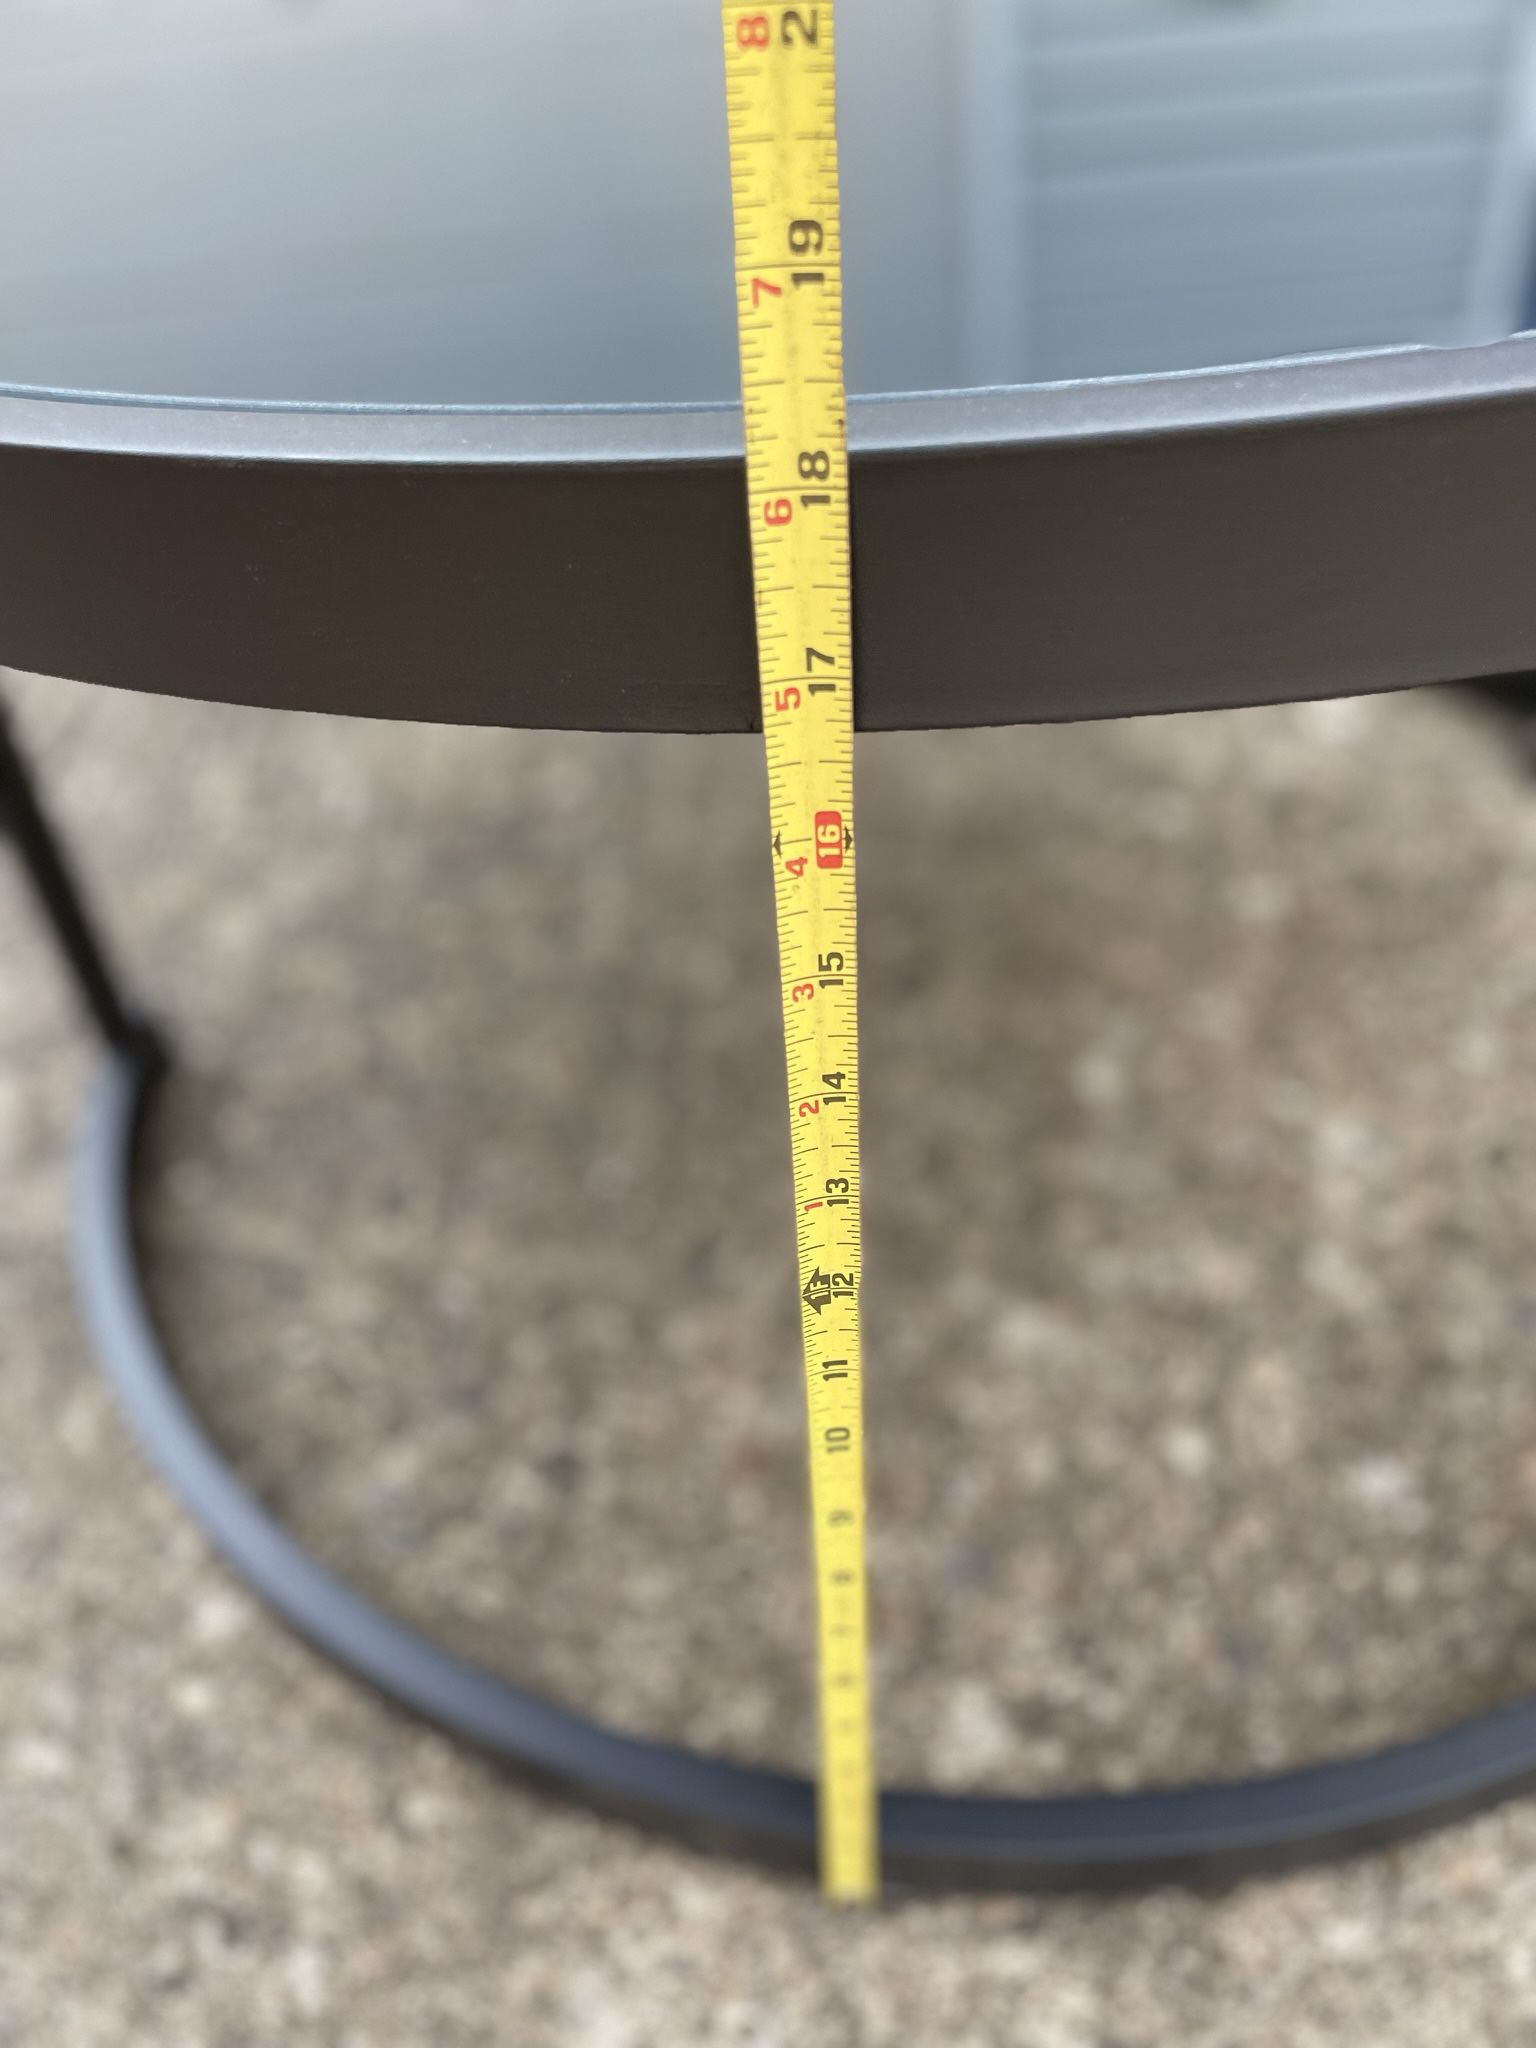 Round Metal/glass Outdoor Table